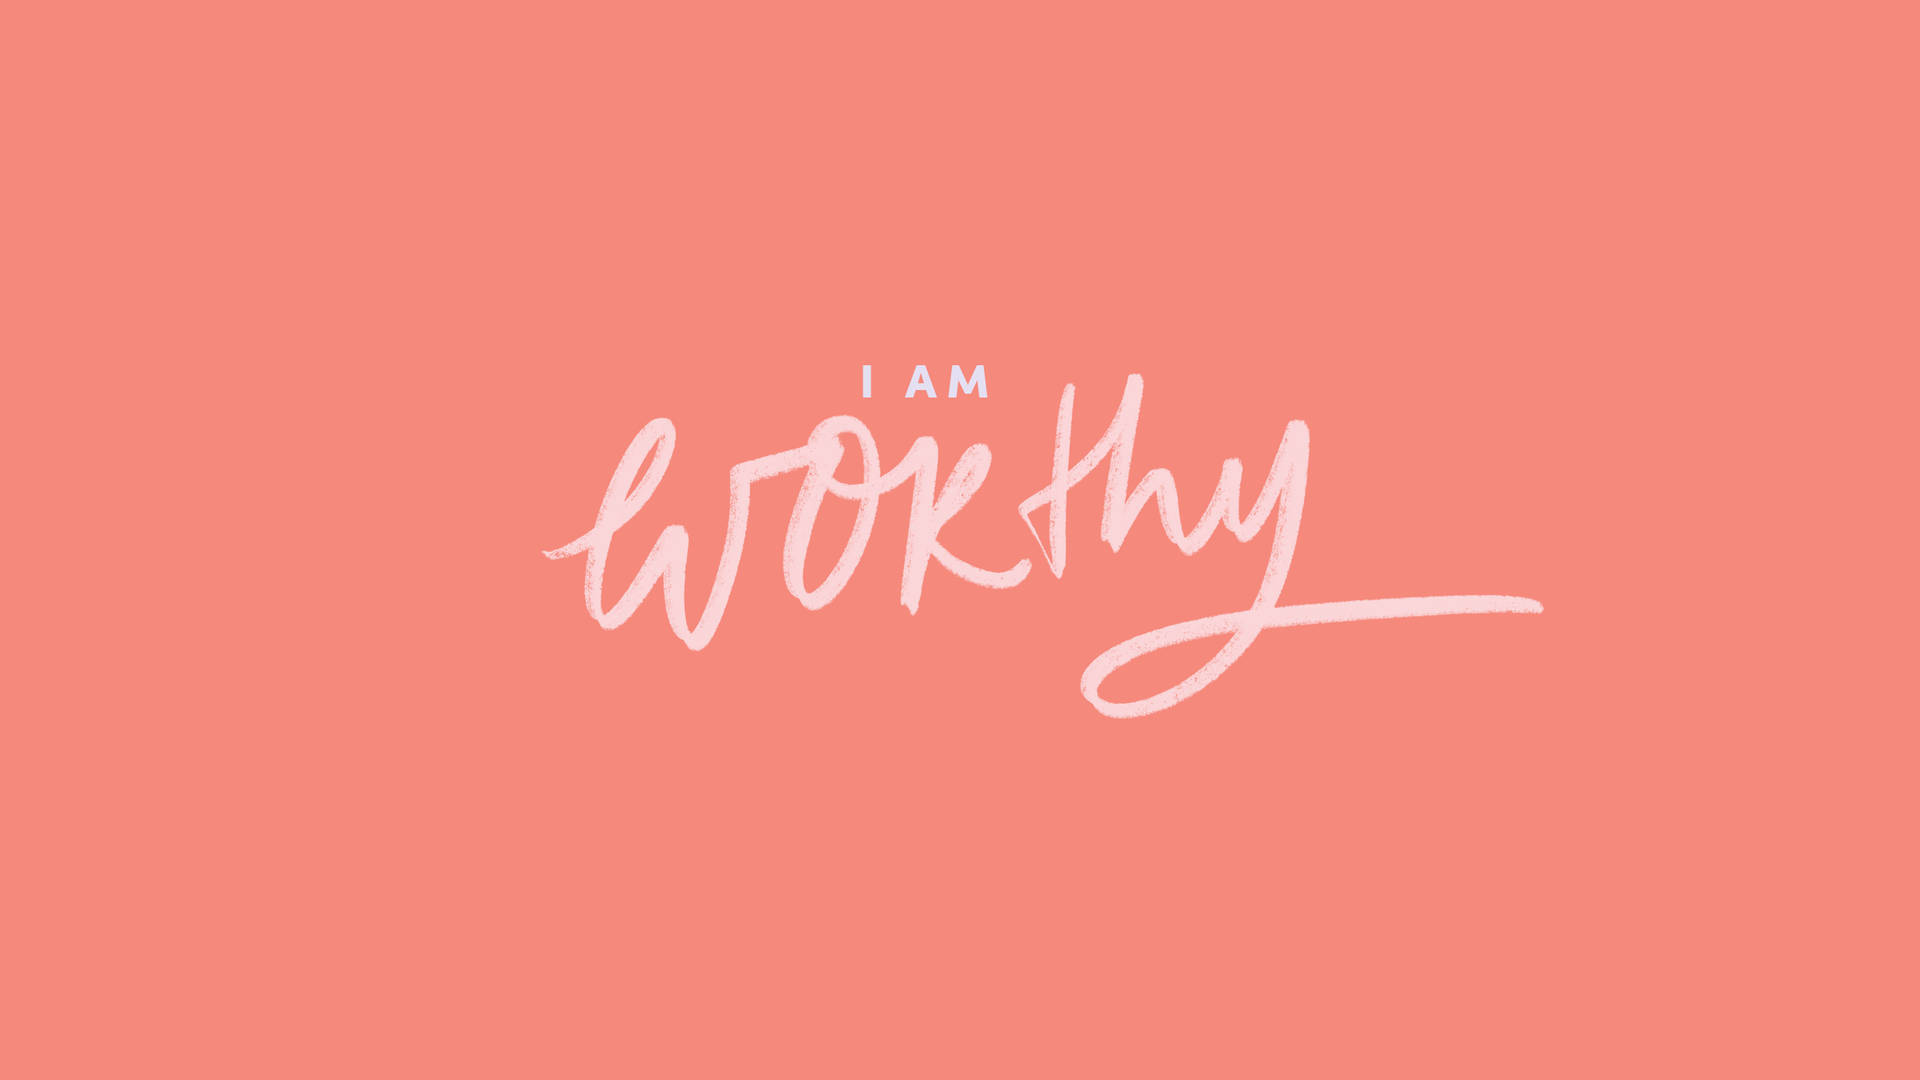 I Am Worthy Handwritten Lettering On A Pink Background Wallpaper